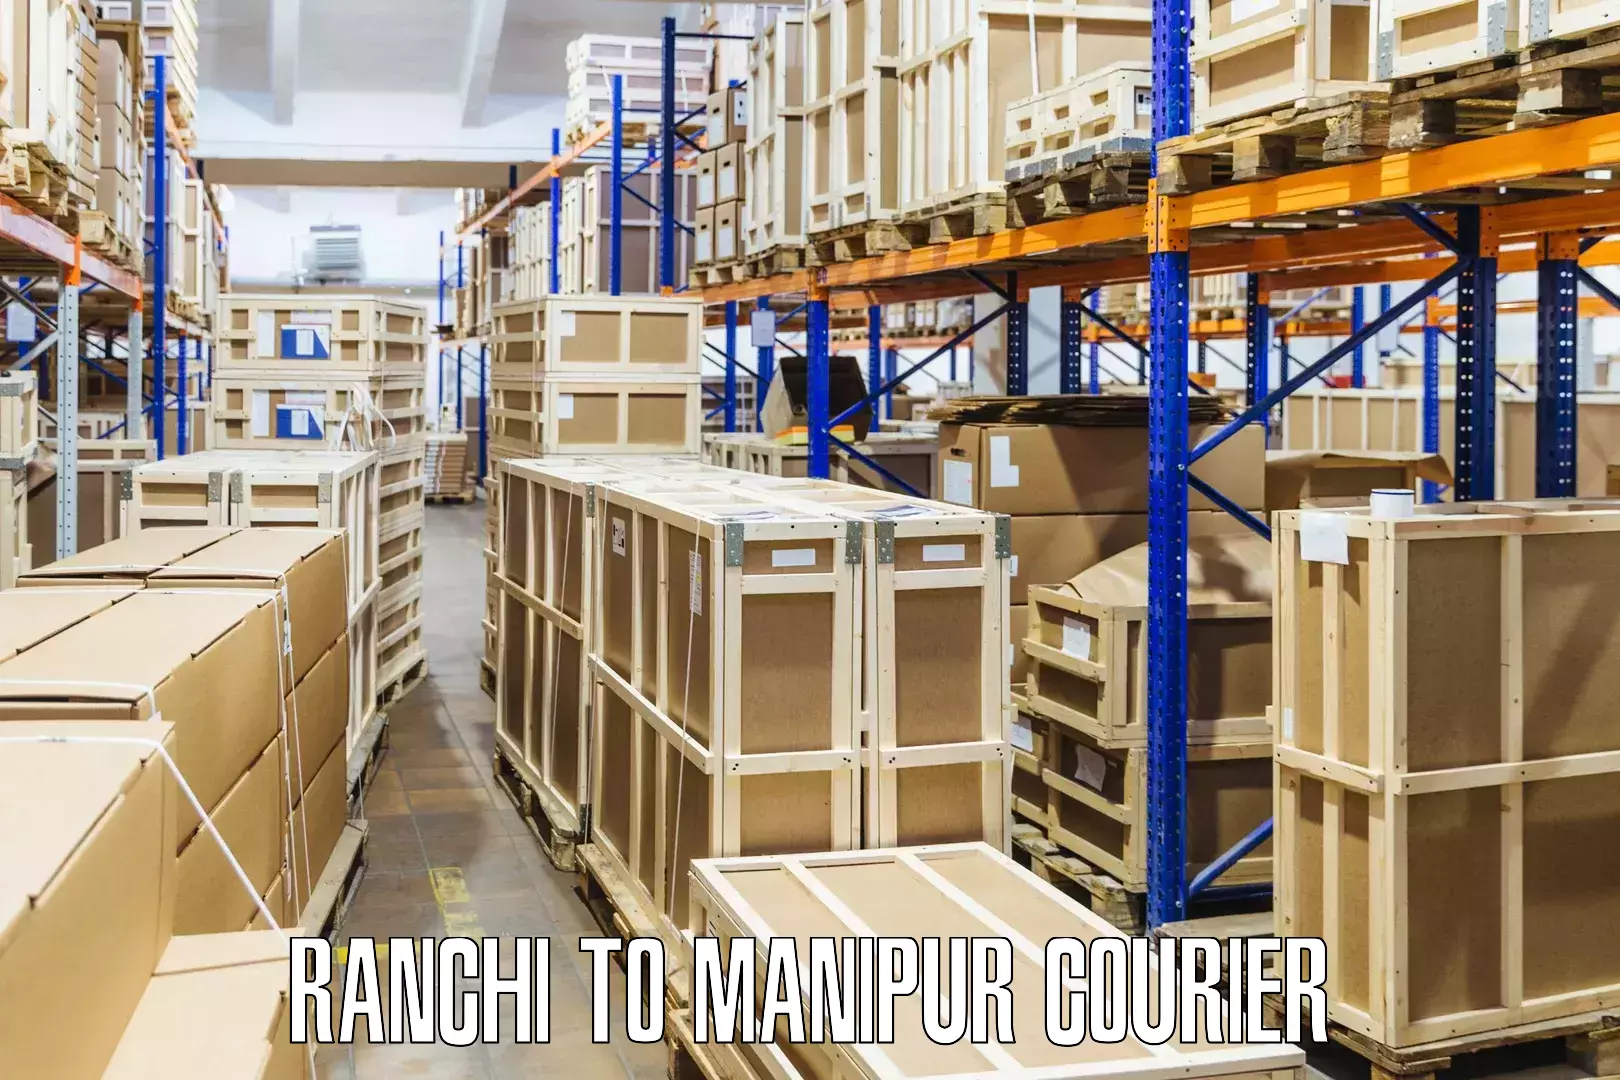 Nationwide shipping capabilities Ranchi to Manipur